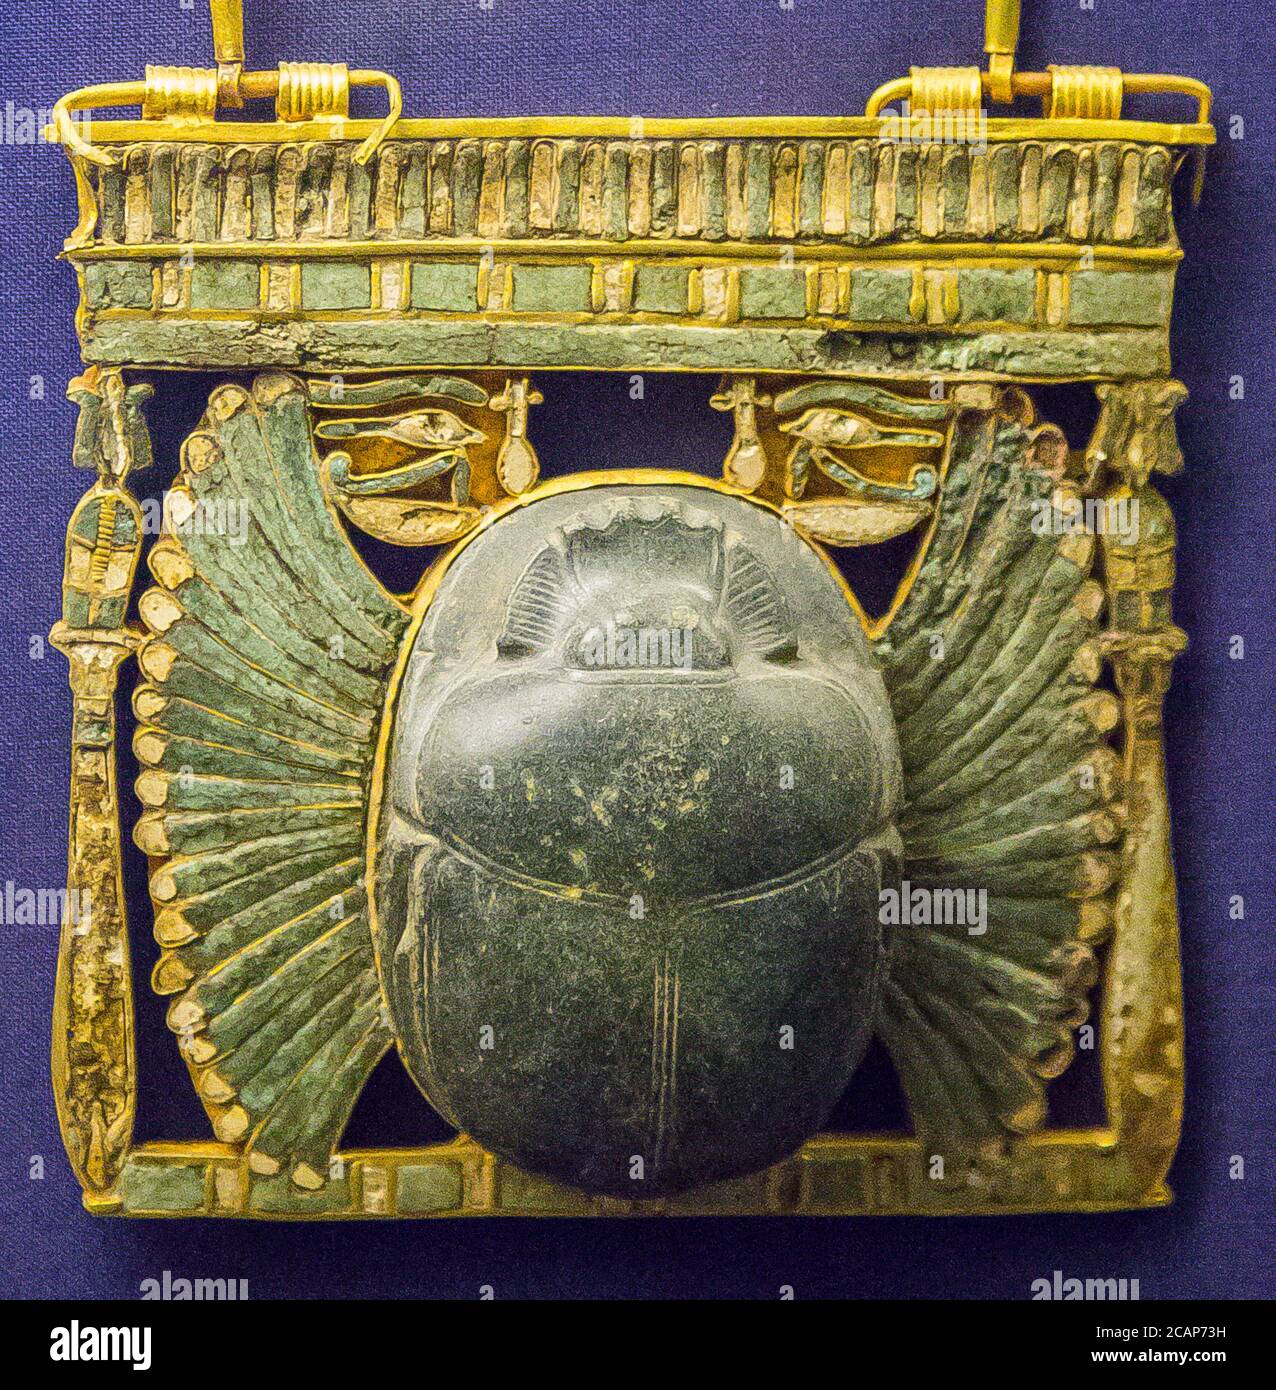 Egypt, Cairo, Egyptian Museum, jewellery found in the royal necropolis of Tanis, burial of king Chechonq II : Pectoral in the form of a temple pylon. Stock Photo